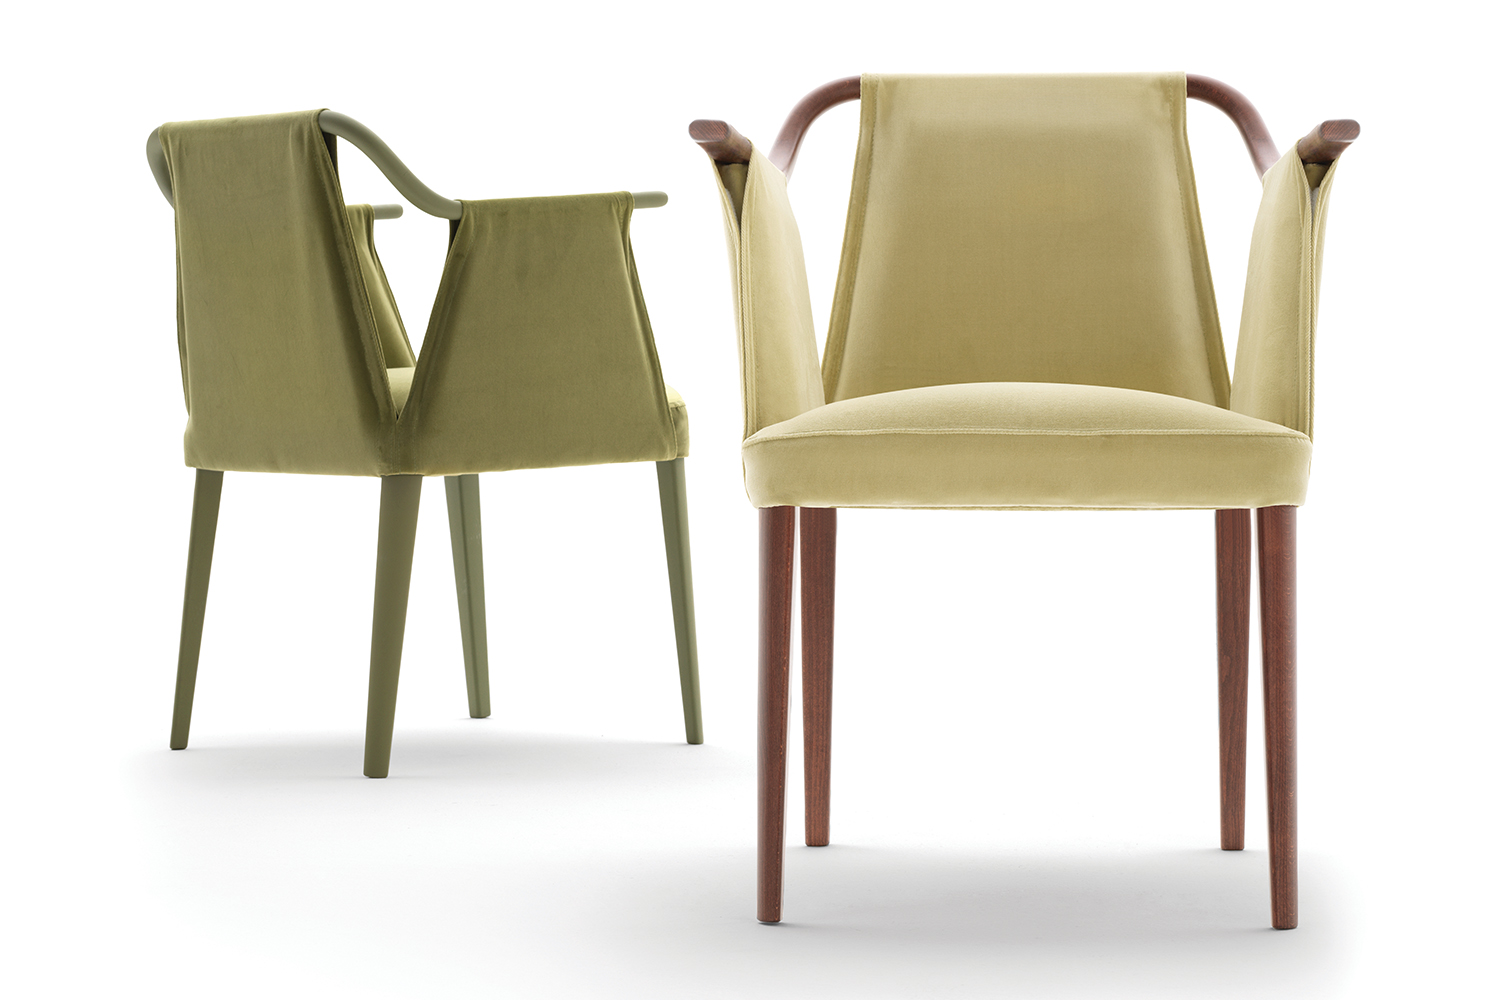 Sayo forms a continuous silhouette since the armchairs upholstery loops through a slender Beech frame to form armrests